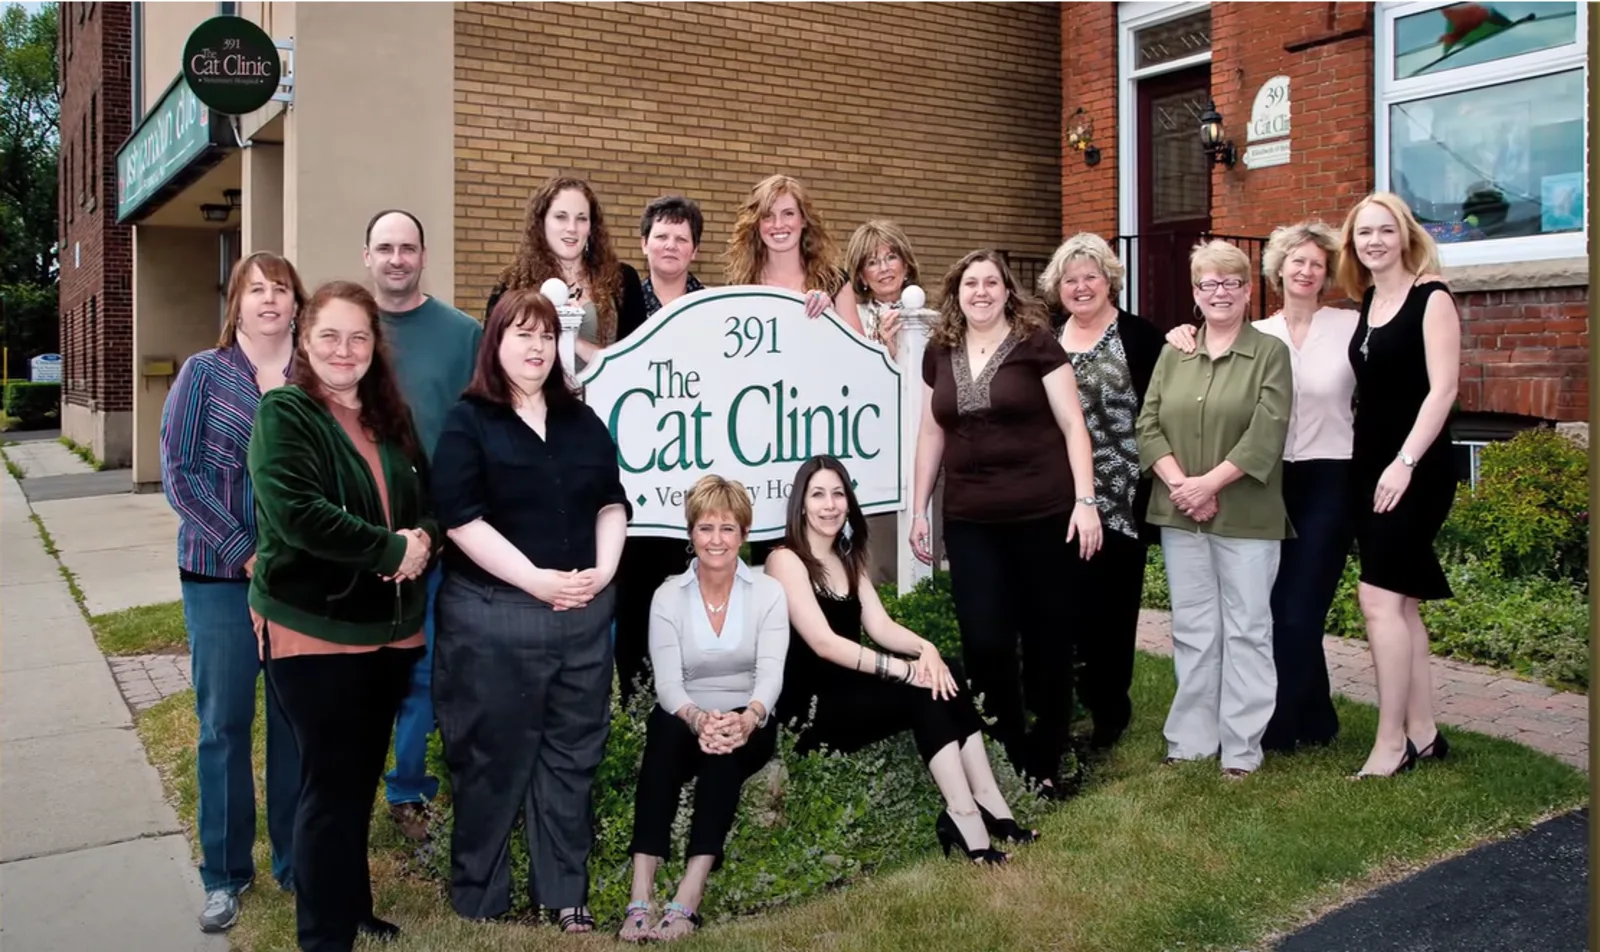 Thumbnail for video highlighting The Cat Clinic